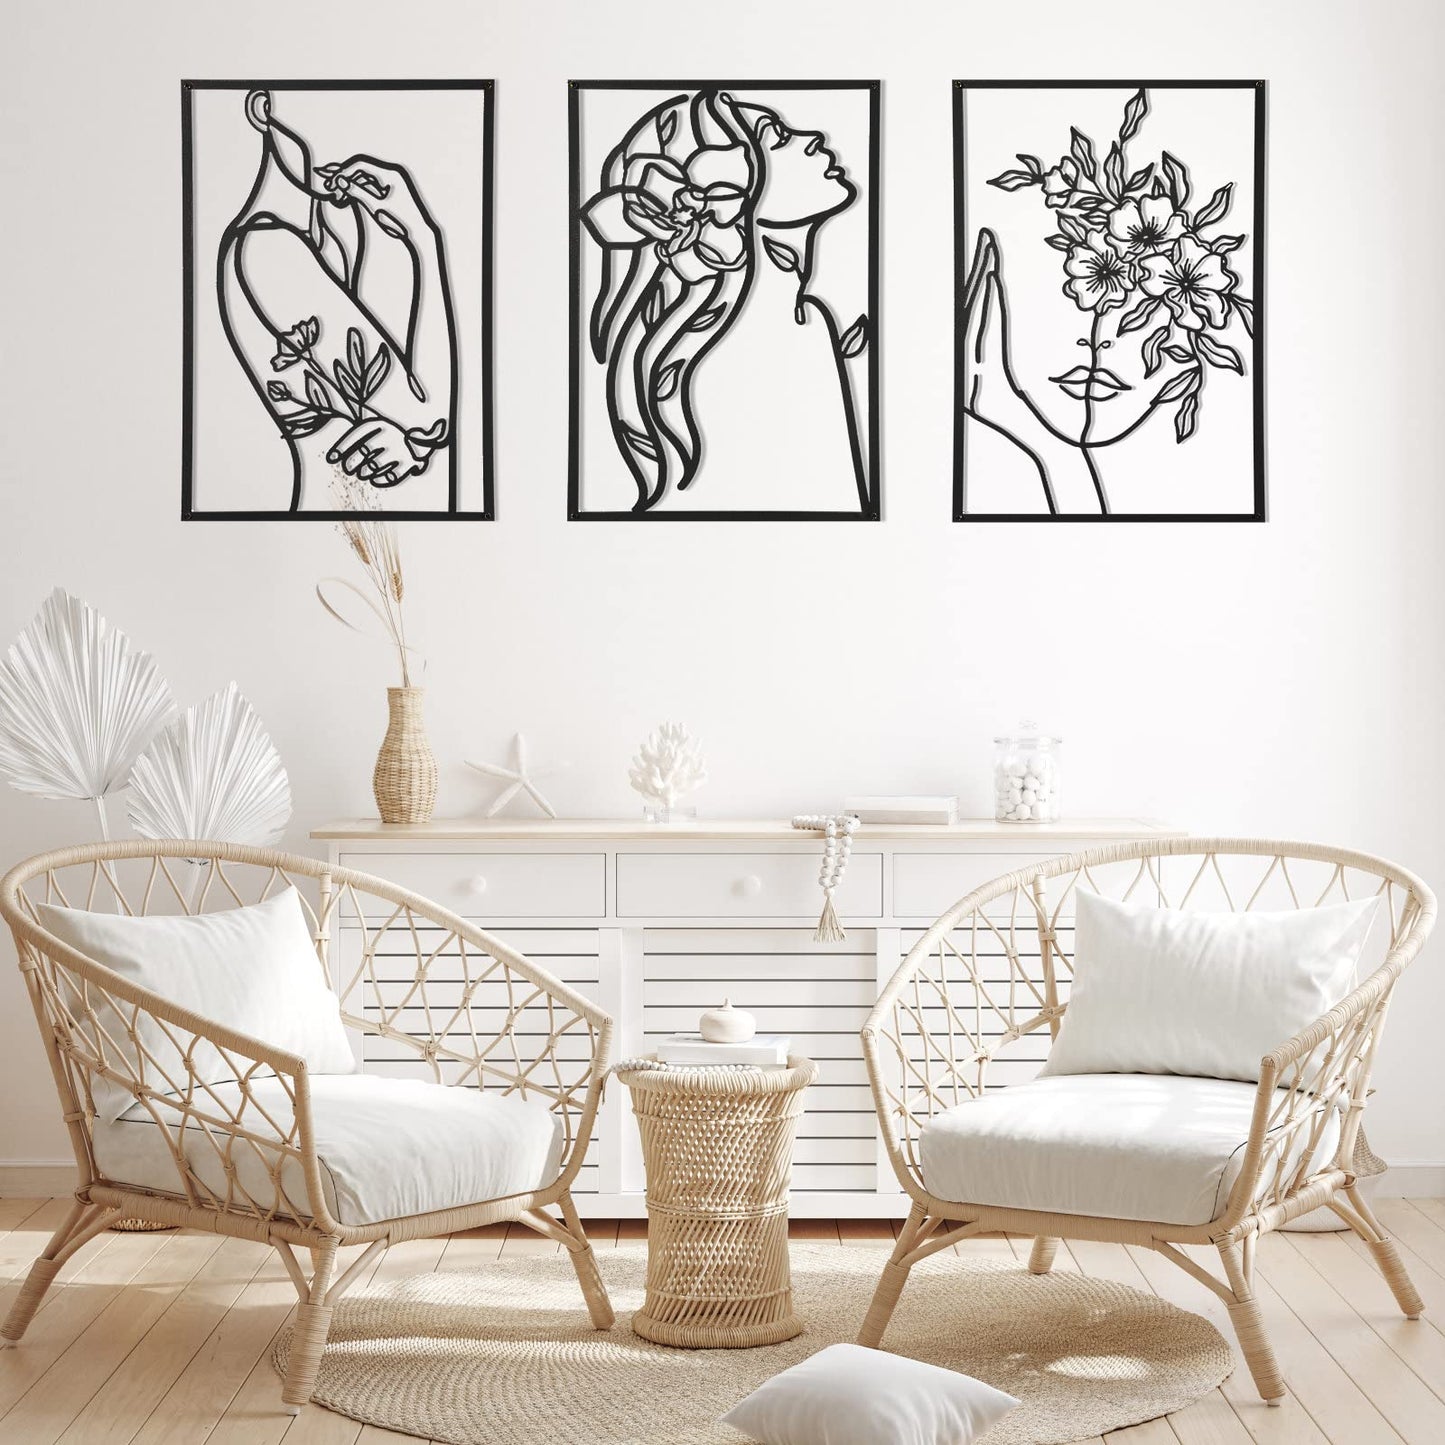 AGIOTA 3 Pcs Gold Wall Decor Above Bed Minimalist for Living Room Metal Line Art - Female Body, Gold Room Decor for Bedroom Modern Wall Art for Indoor 15inch